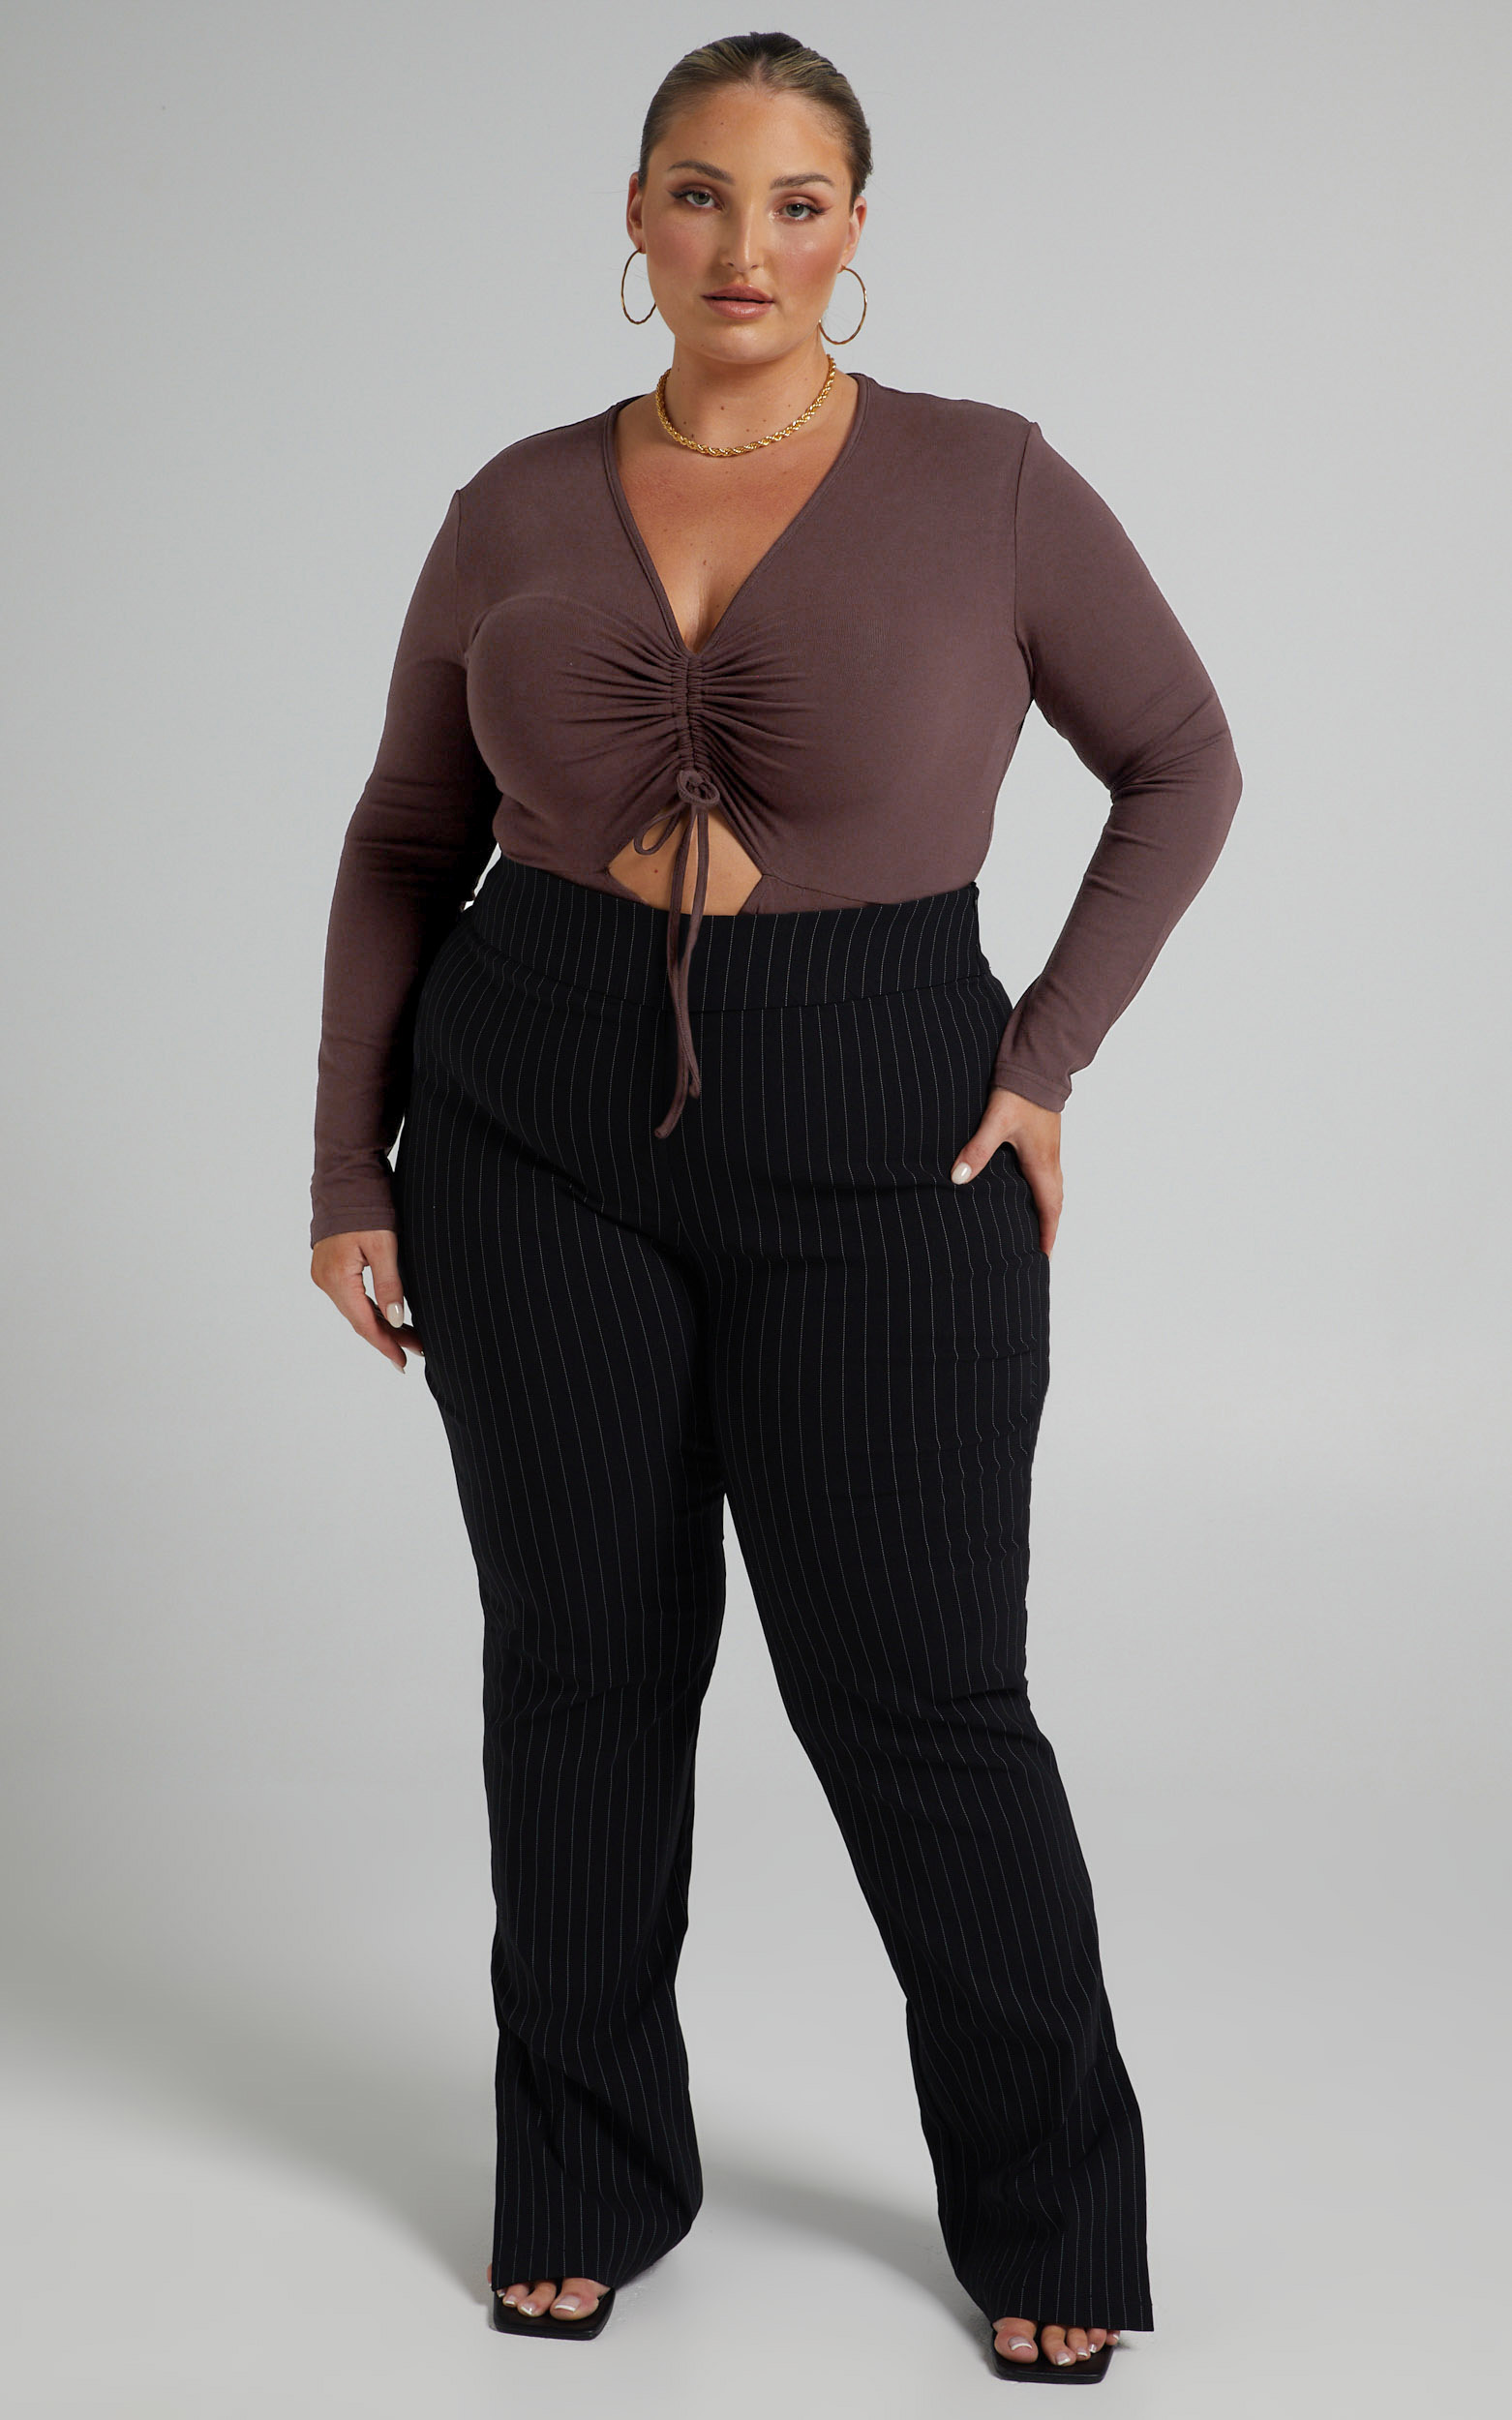 Camila Long Sleeve Ruched Front Bodysuit in Chocolate - 06, BRN1, hi-res image number null